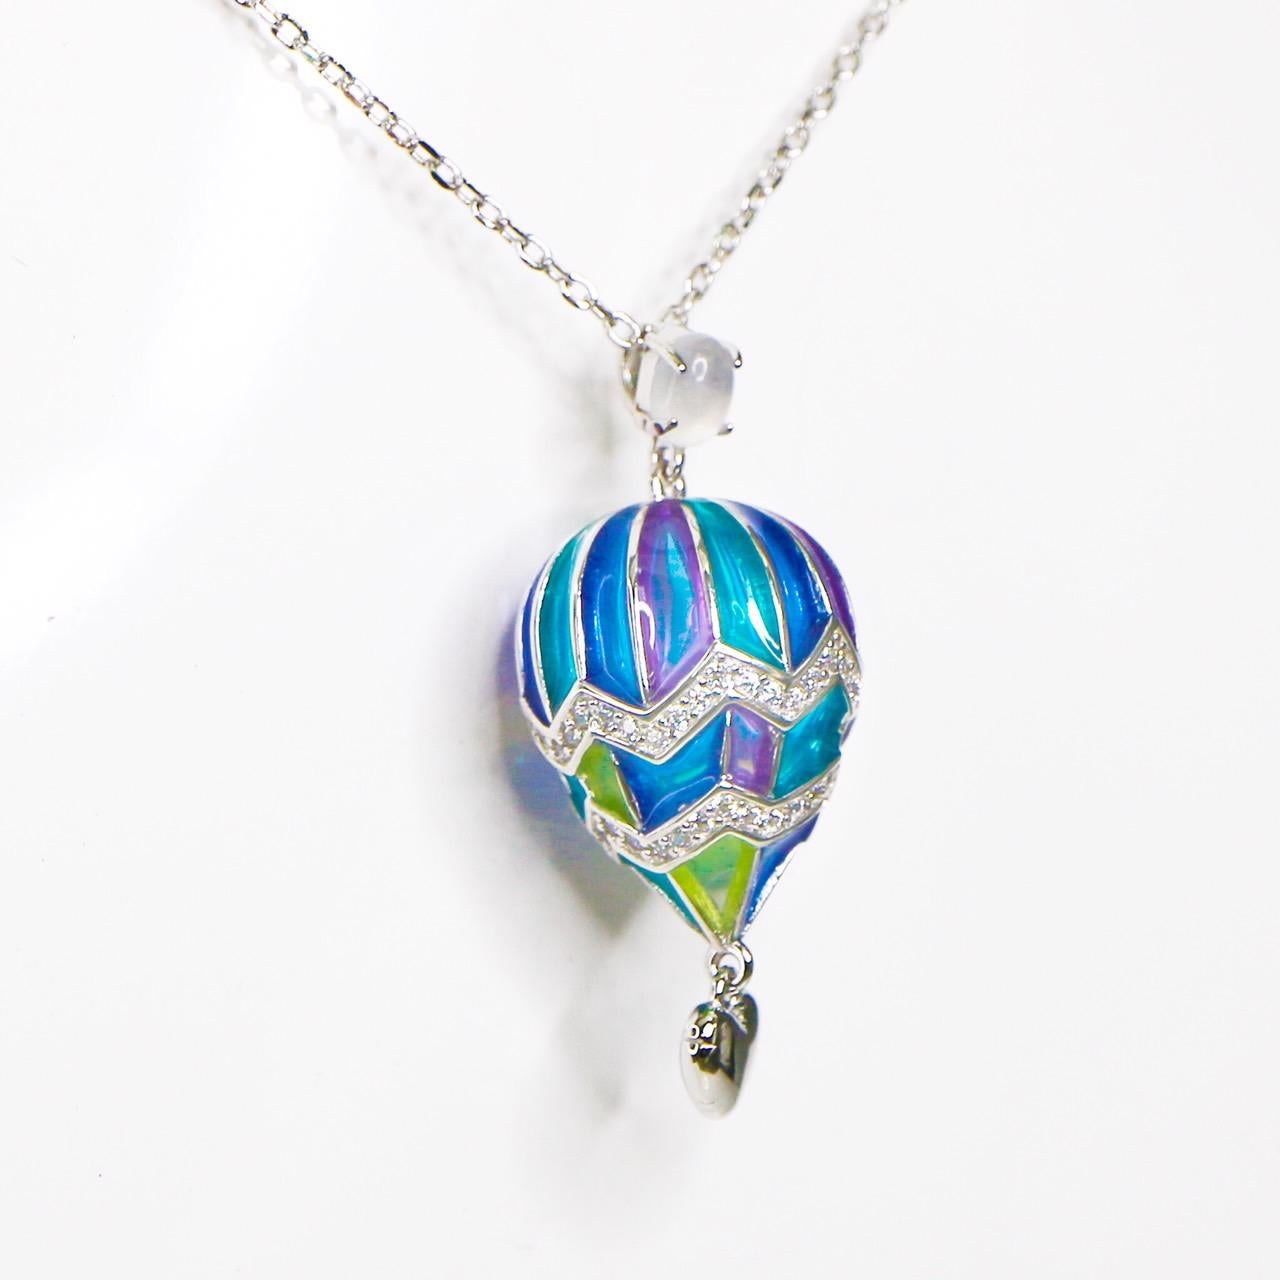 *925 Sterling Silver Hot Air Balloon Enamel Antique Stud Necklace*

Hot air balloon shape enamel on the white gold plated 925 sterling silver band with fine workmanship and enamel art. 

The earrings combine fashion and classic design ideas and are